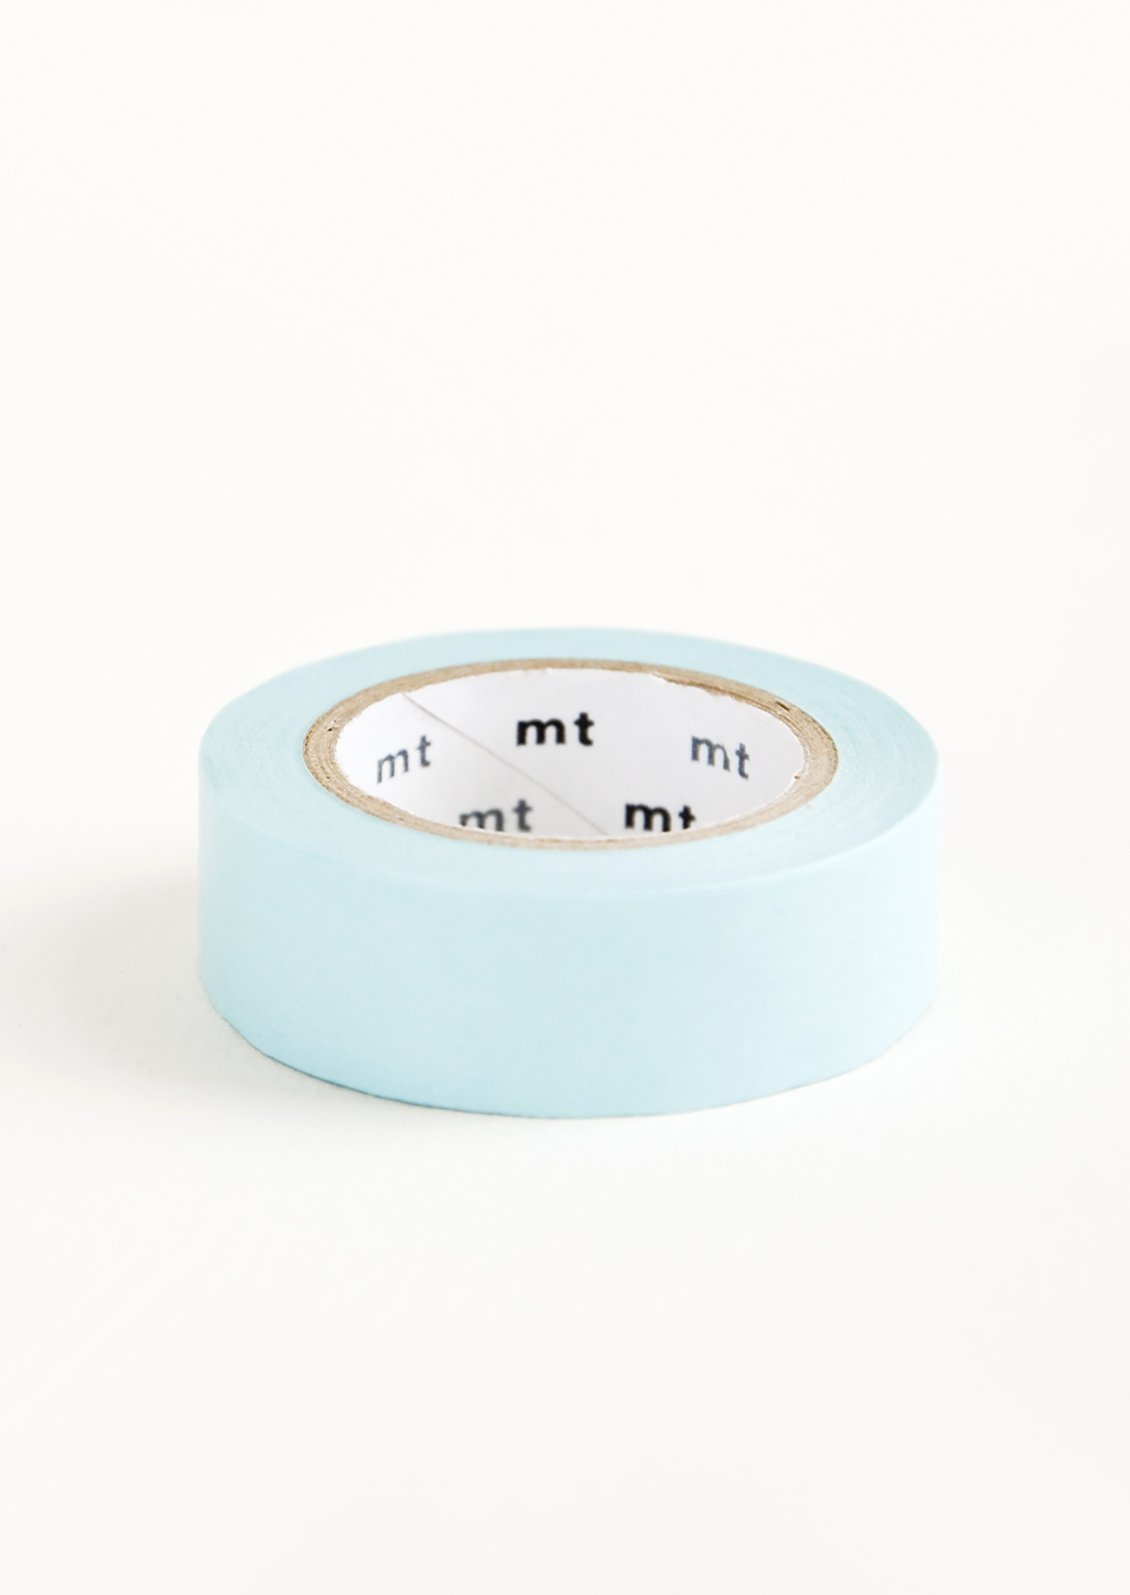 A roll of washi tape in sky blue color.